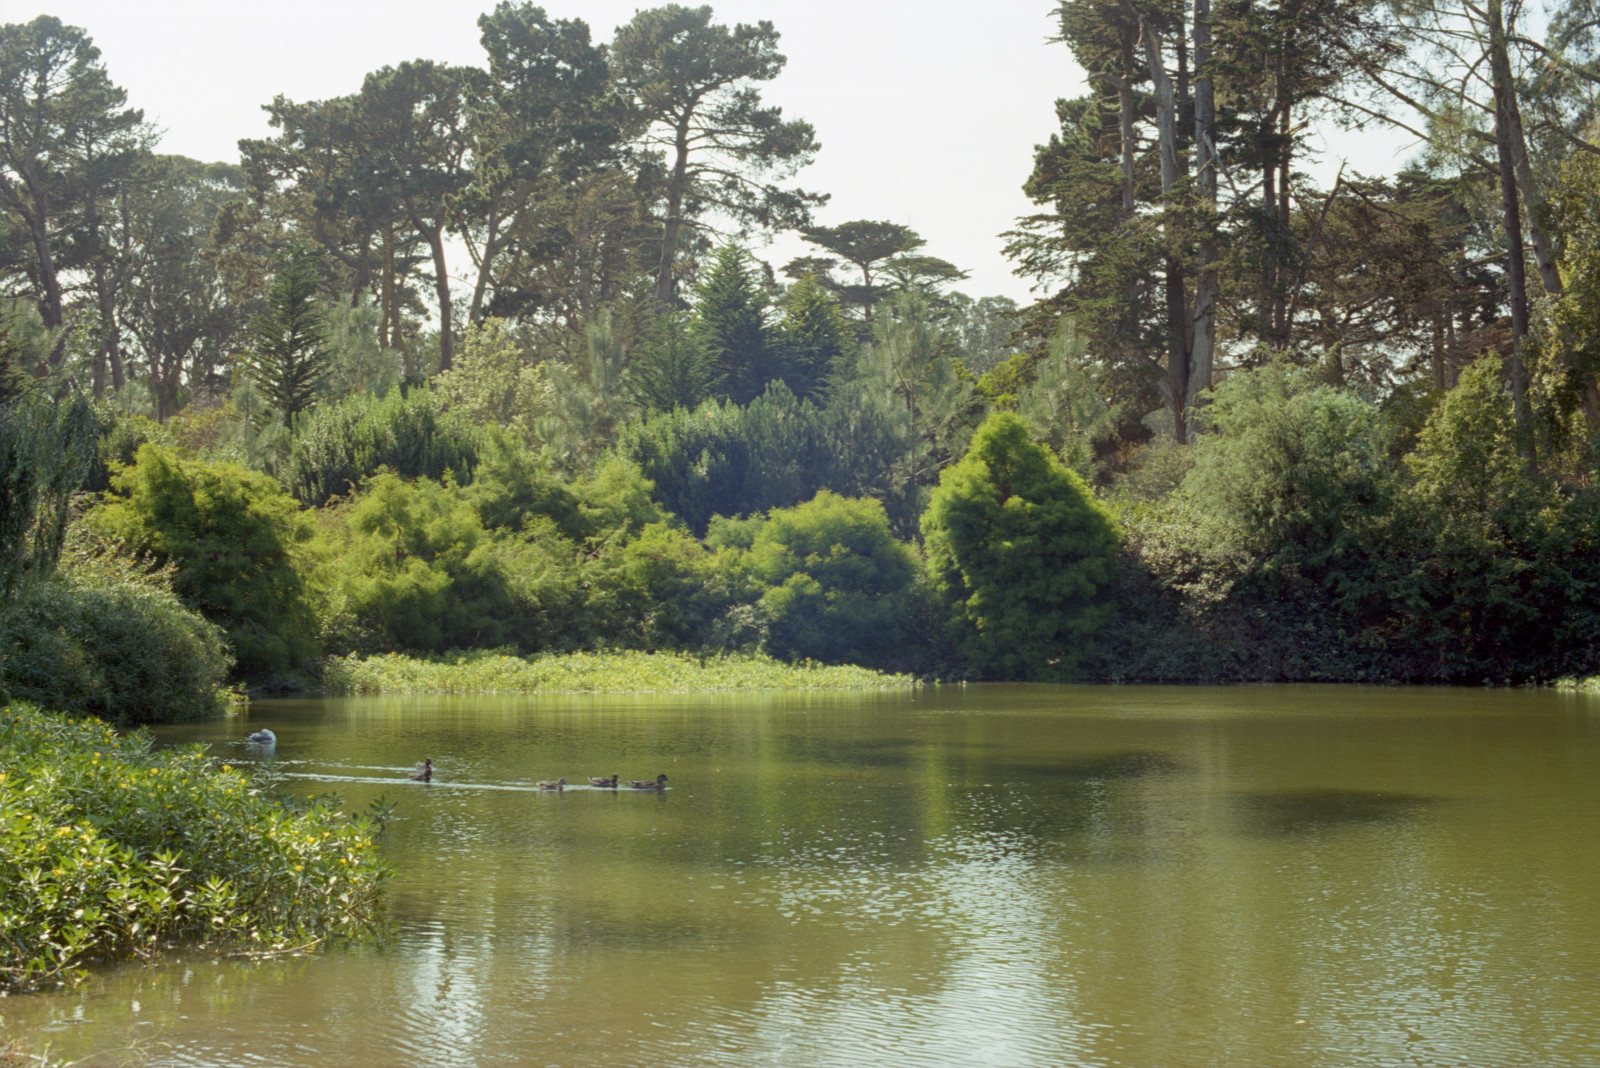 A flotilla of ducks heads out from the cove into the lake itself. A large grove of soft green trees stands out on the far side; and beyond that, the forest of Golden Gate Park.